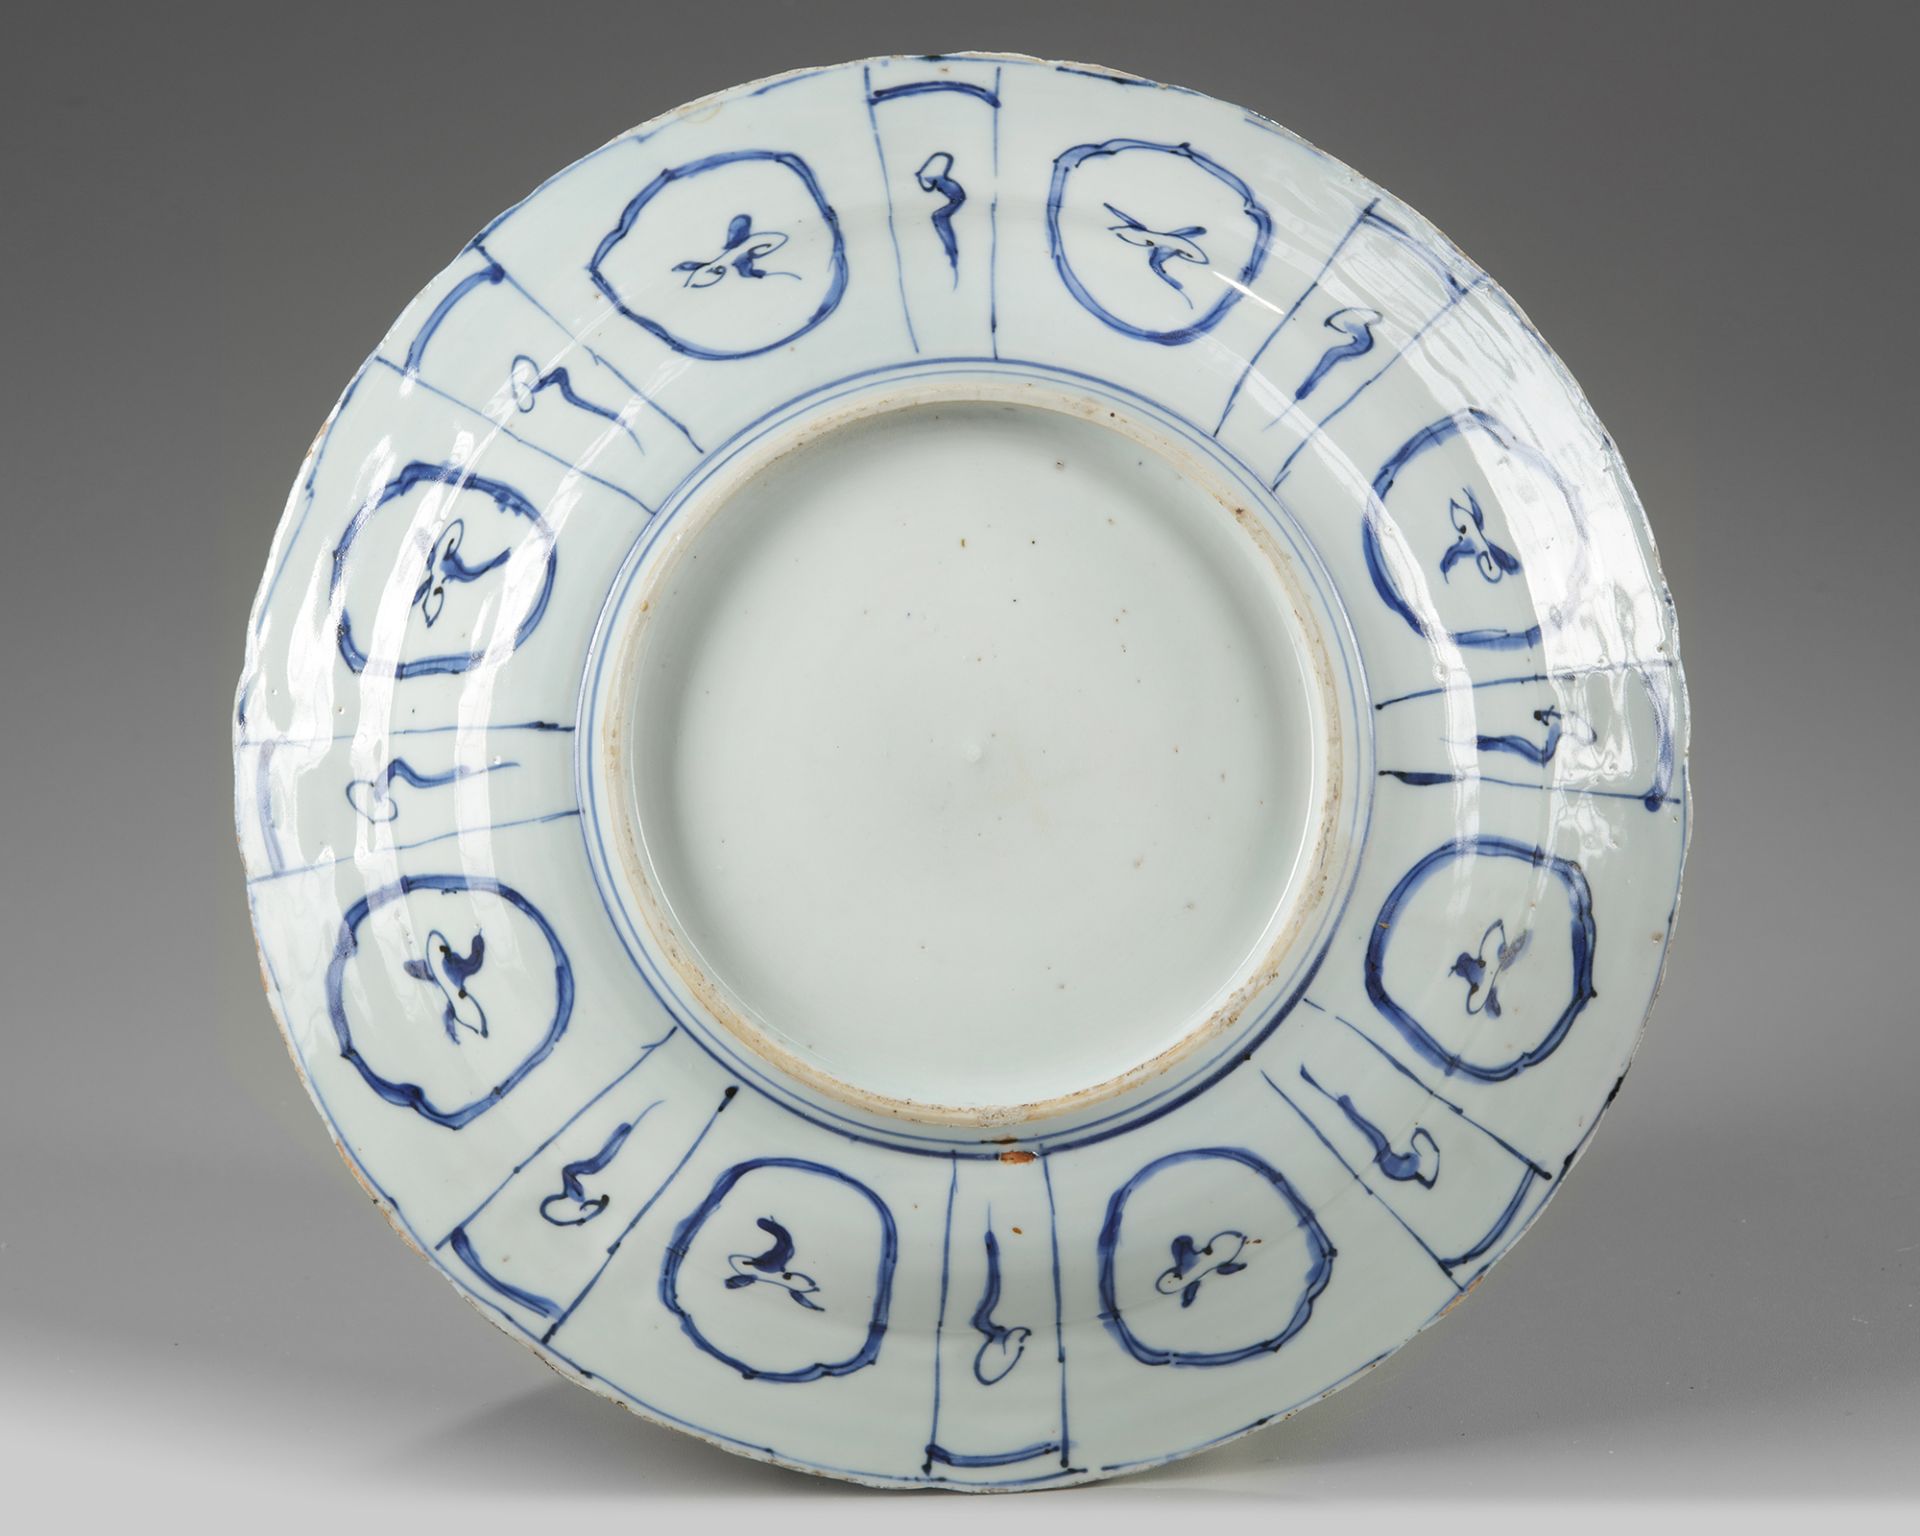 A CHINESE BLUE AND WHITE 'DUCKS AND LOTUS 'KRAAK PORSELEIN' DISH, WANLI PERIOD (1573-1619) - Image 2 of 2